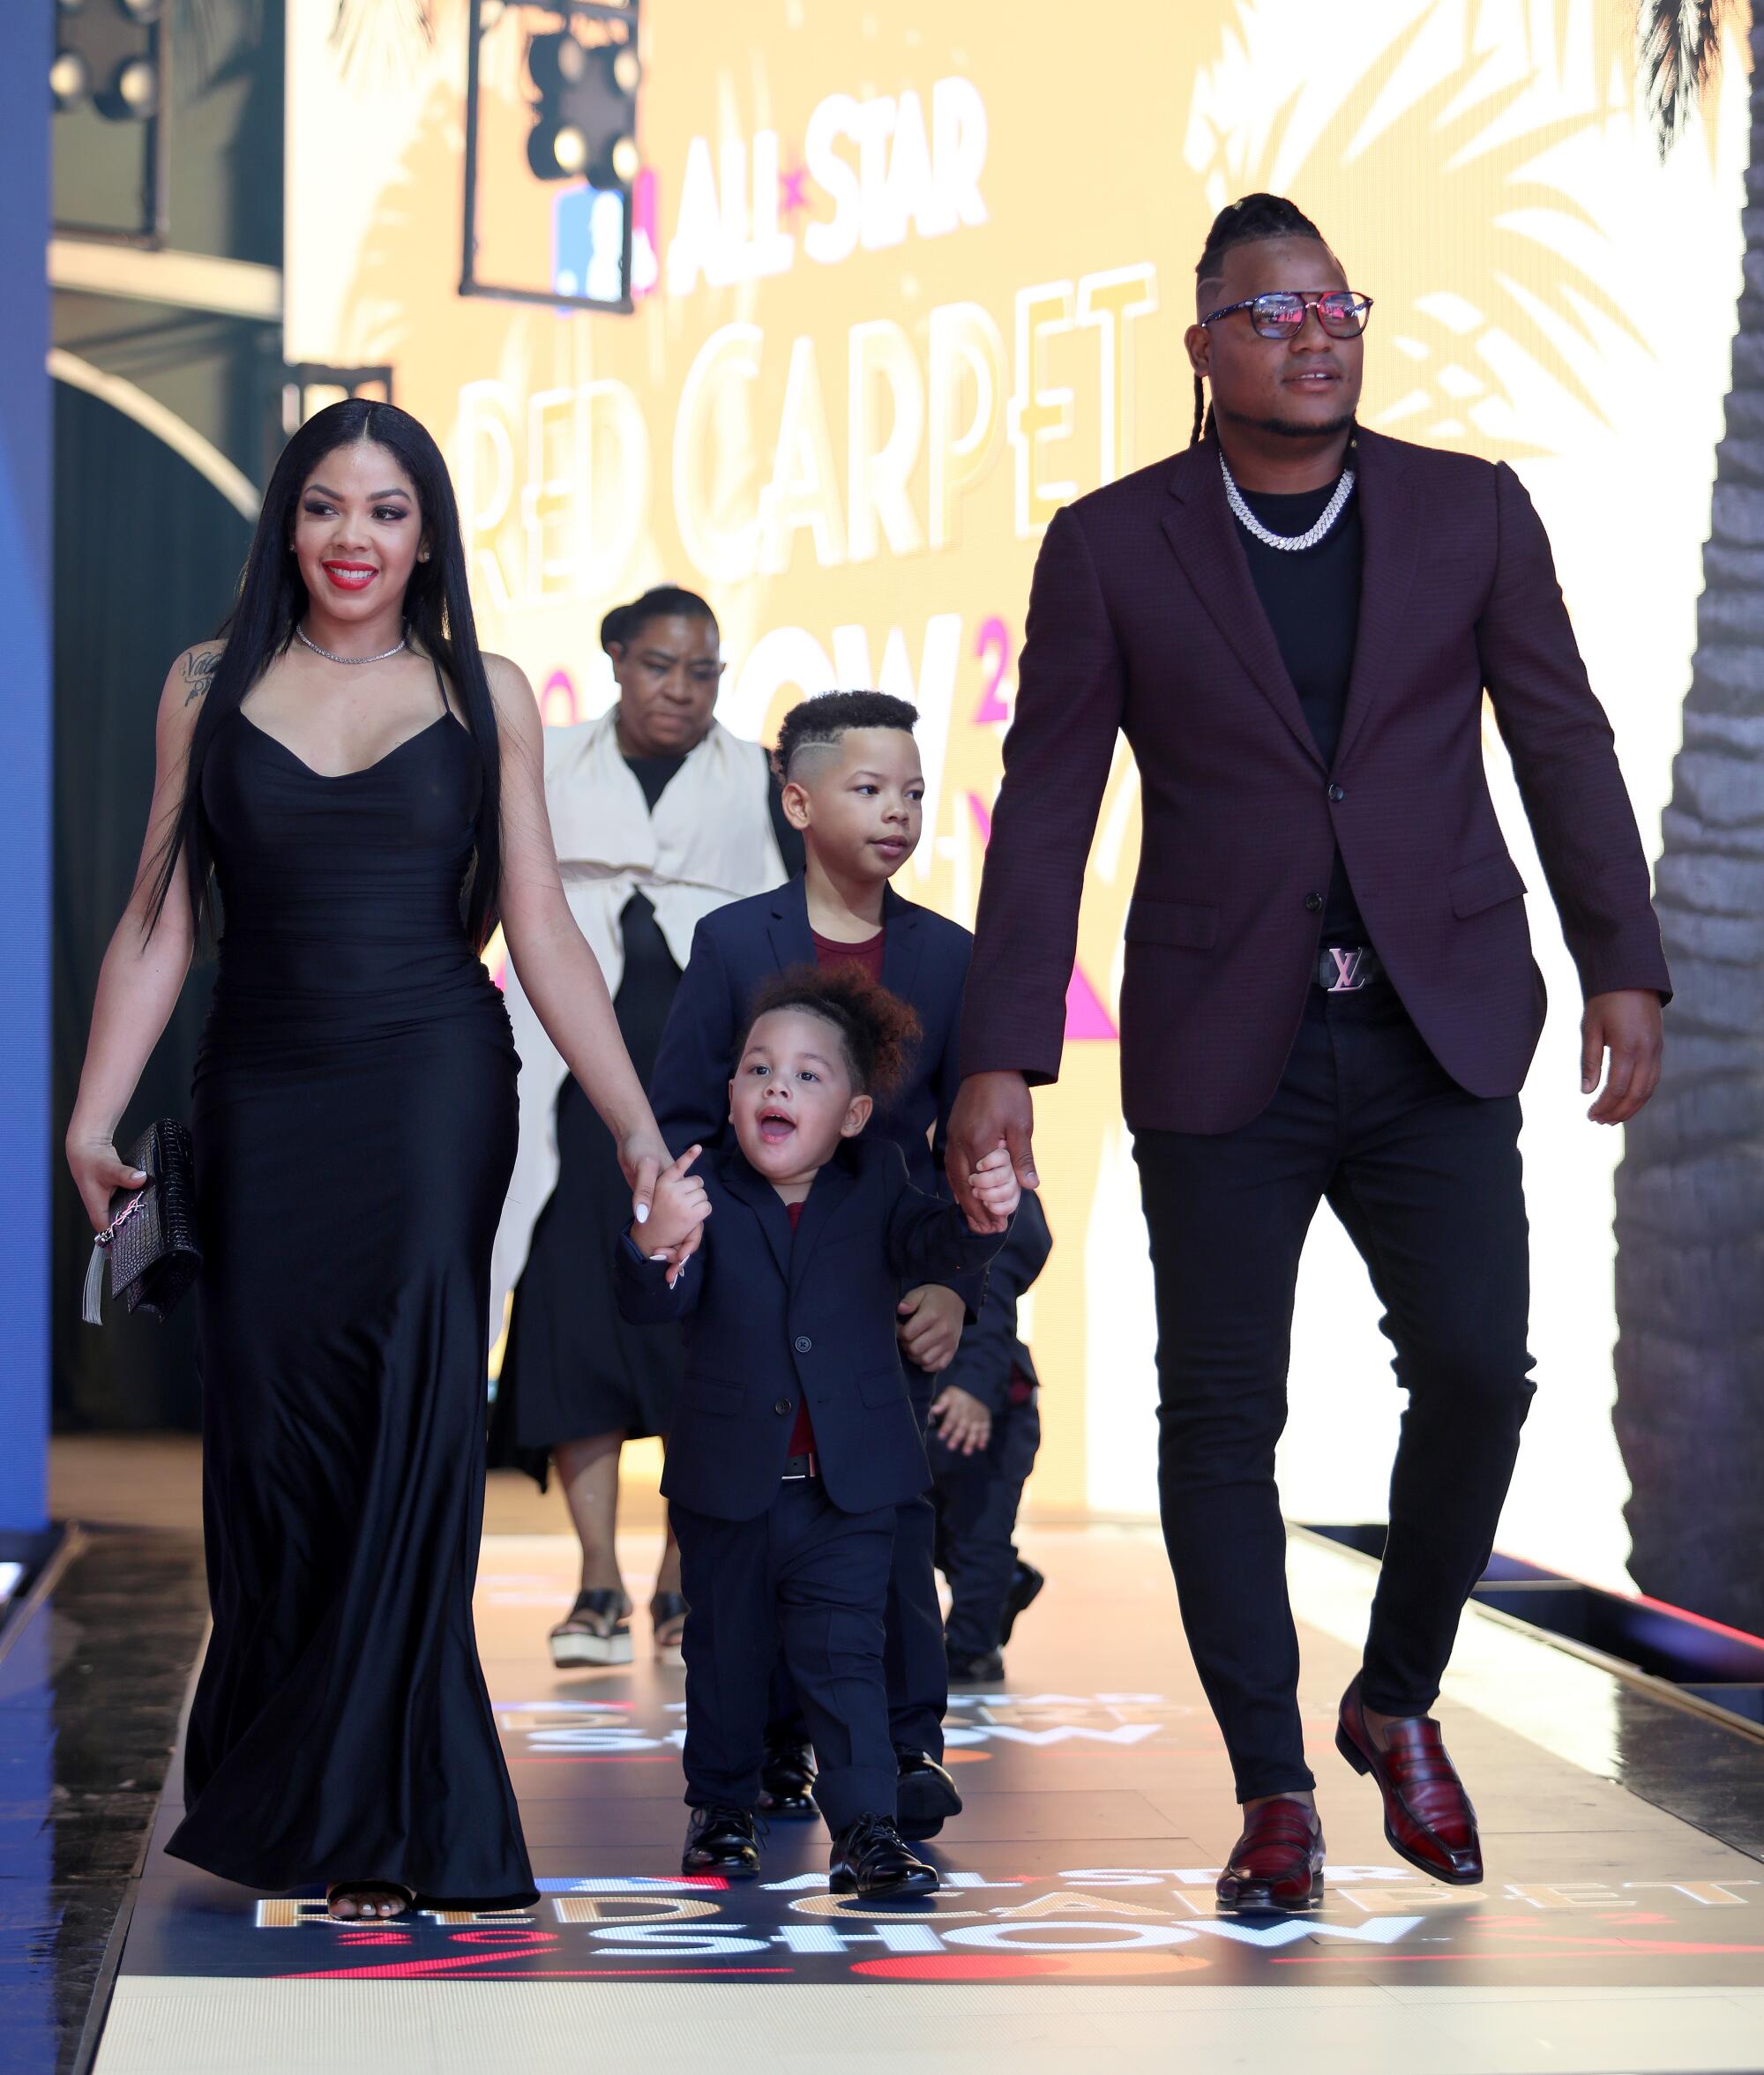 Framber Valdez in a purple and black suit and family arrive at the 2022 MLB All-Star Game Red Carpet Show.